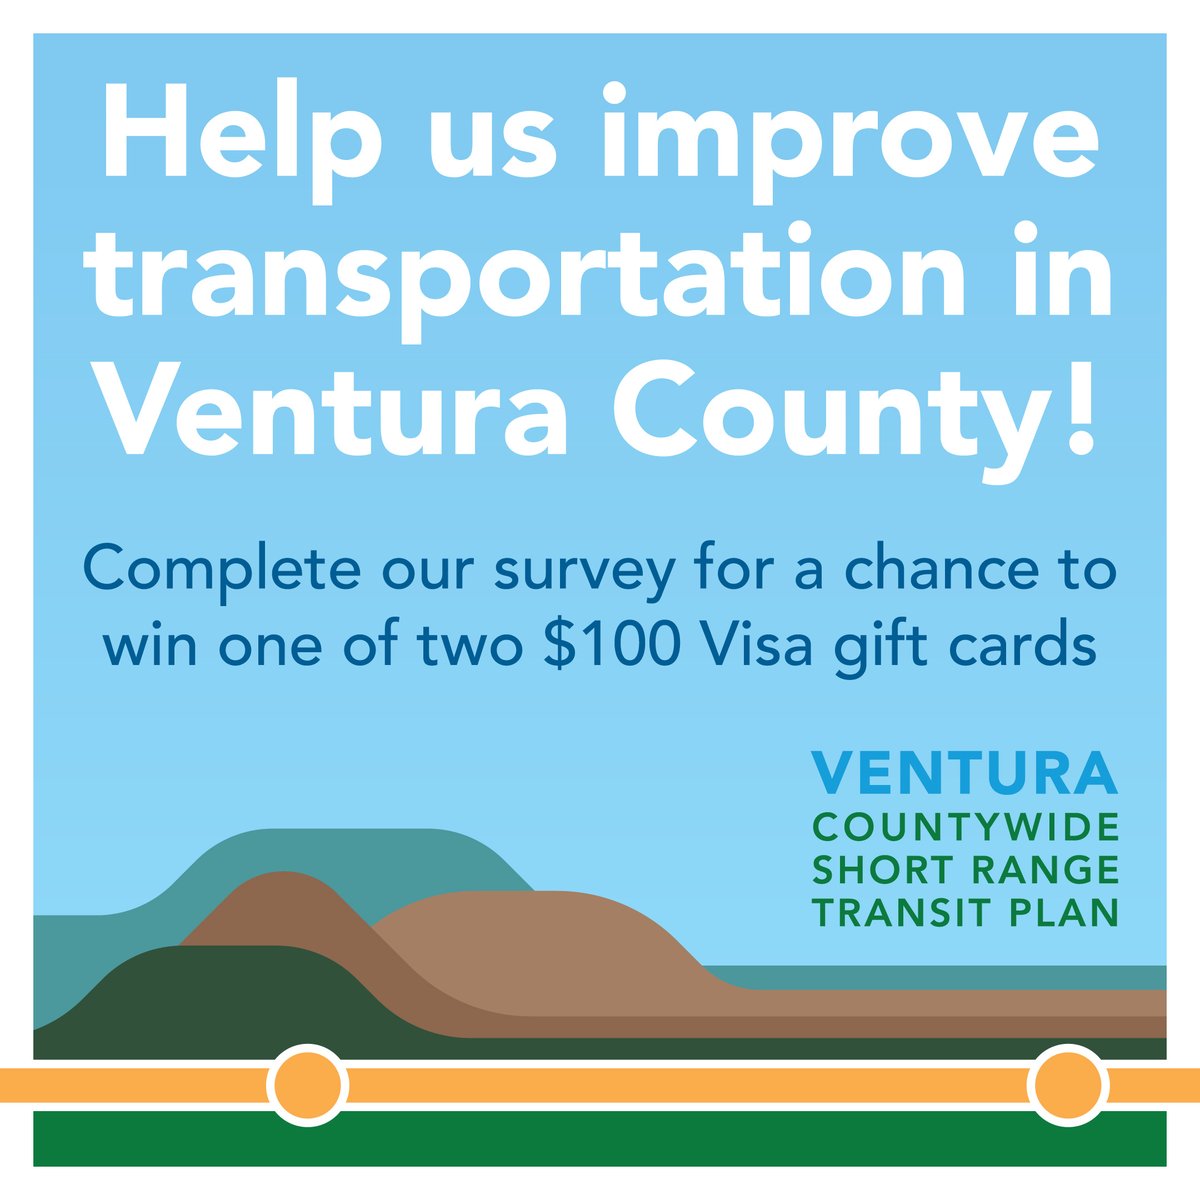 The Ventura County Transportation Commission wants to know what you think about transportation in Ventura County. Complete their short survey at goventura.org/srtp for a chance to win one of two $100 Visa gift cards.